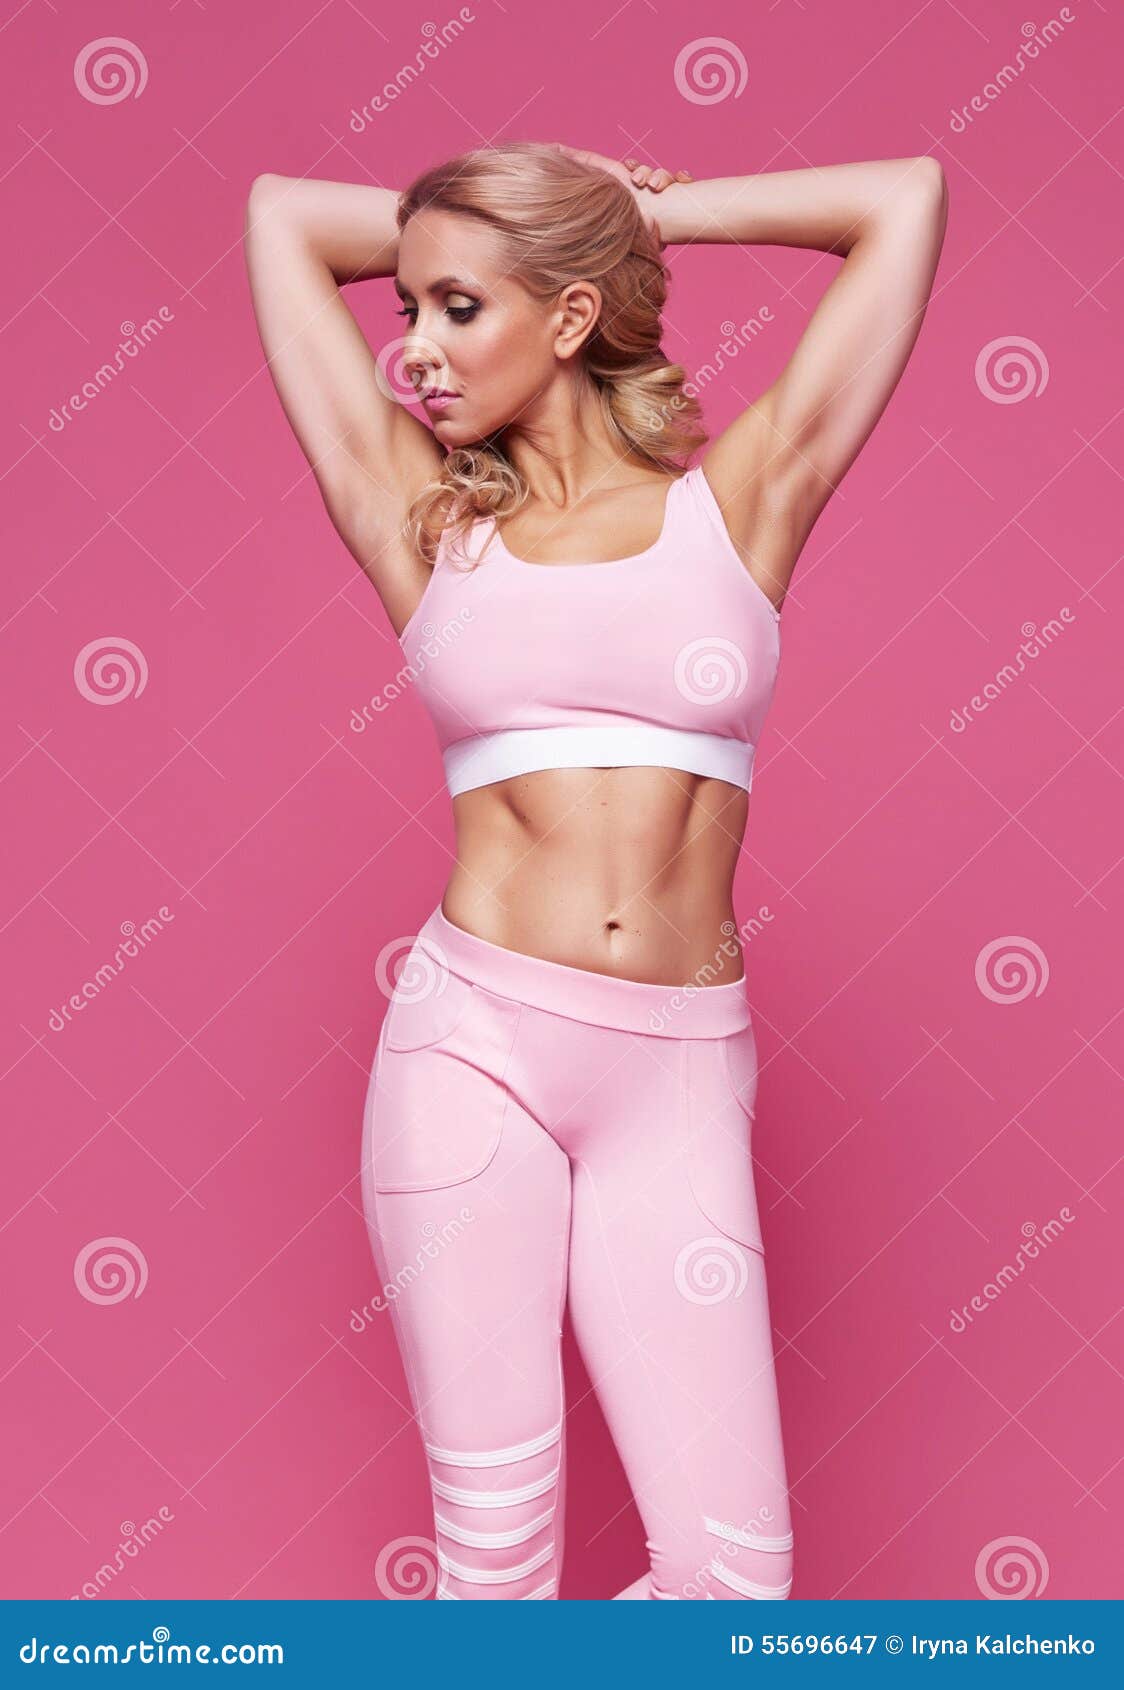 Beauty Woman Sport Yoga Pilates Fitness Body Shape Clothes Stock Image -  Image of coach, fitting: 55696647